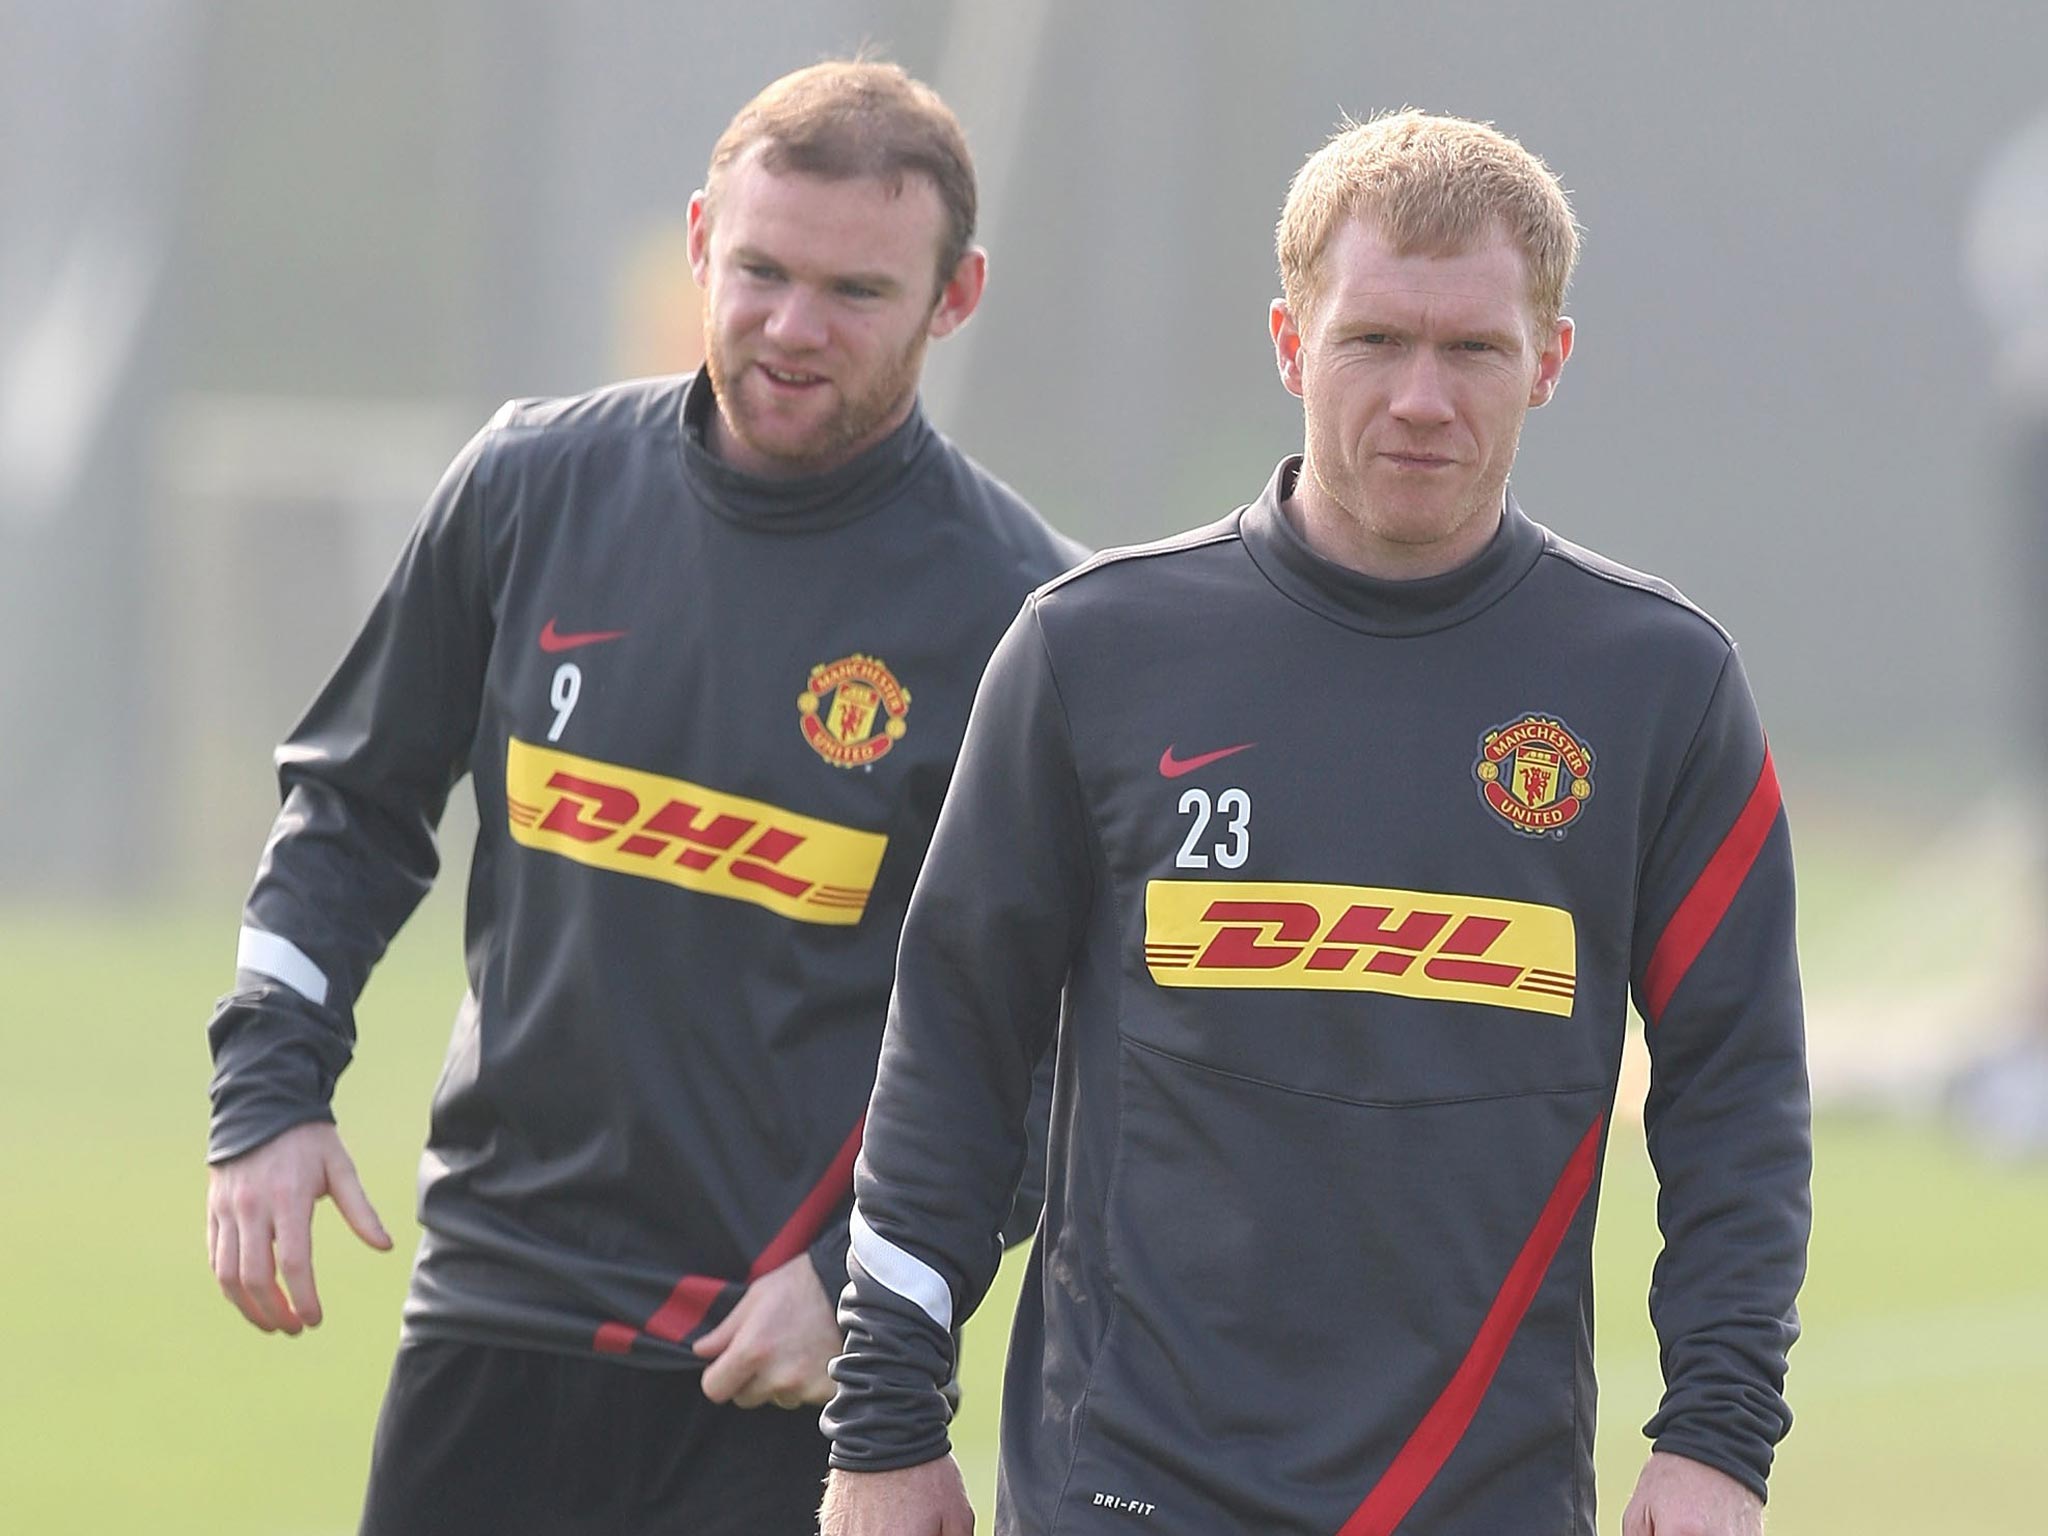 Rooney said Scholes’ coaching role at United was exaggerated